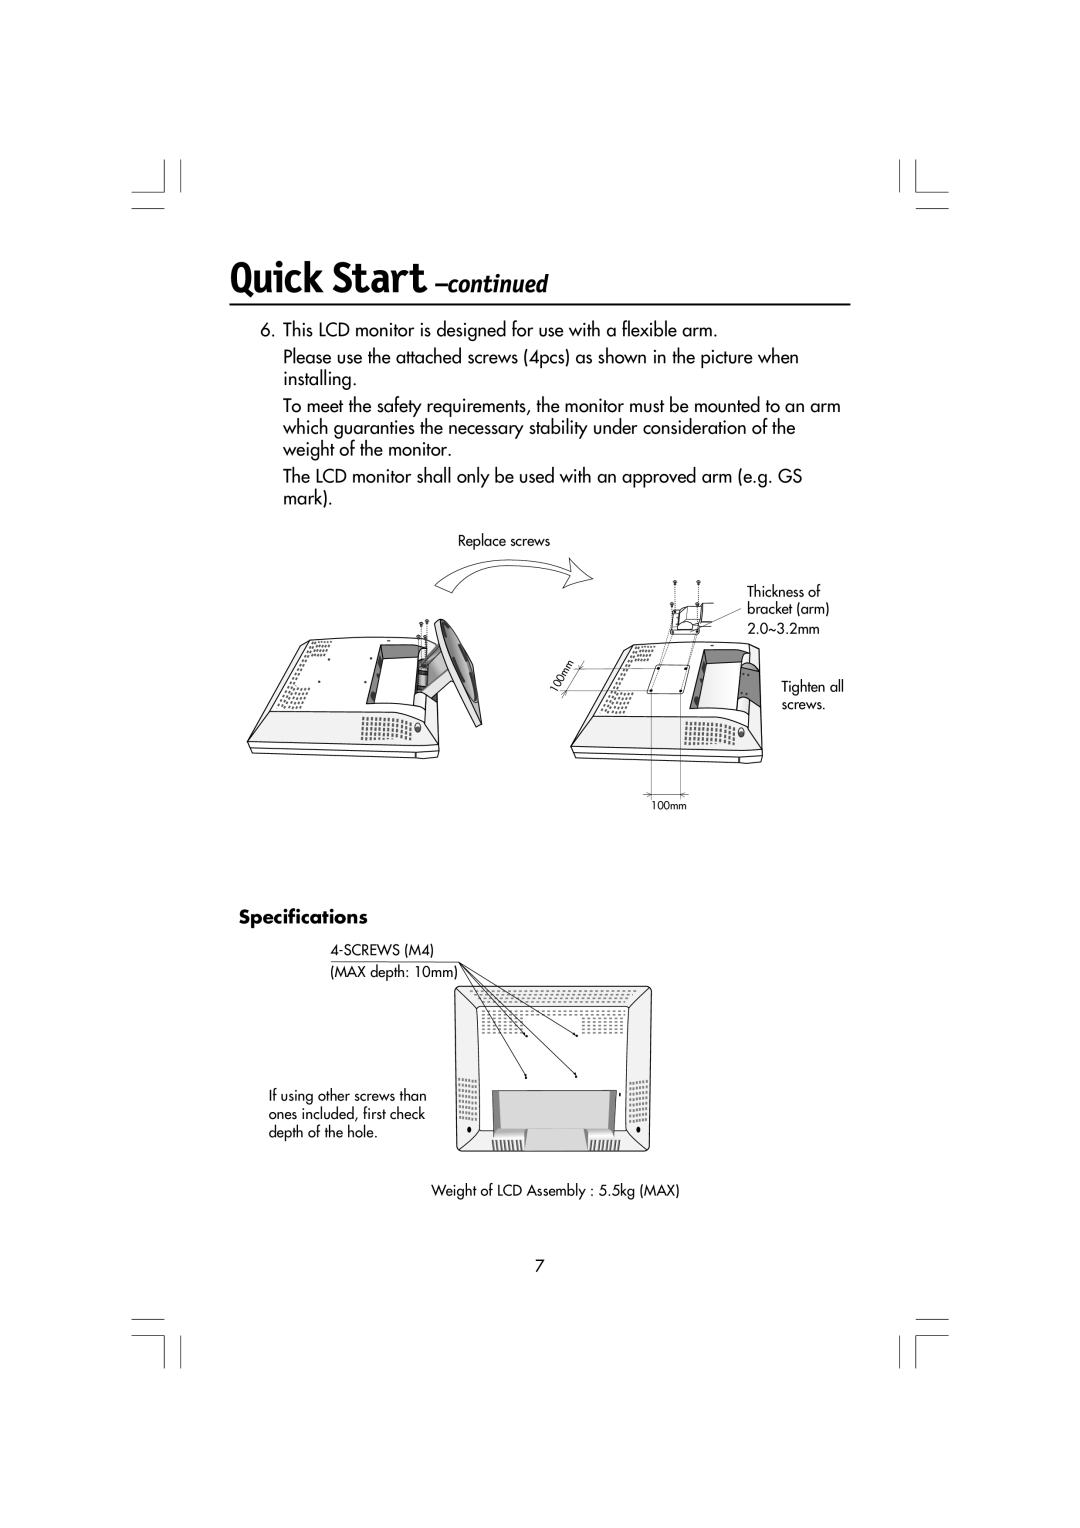 Mitsubishi Electronics LCD1720M manual Quick Start -continued, Specifications 